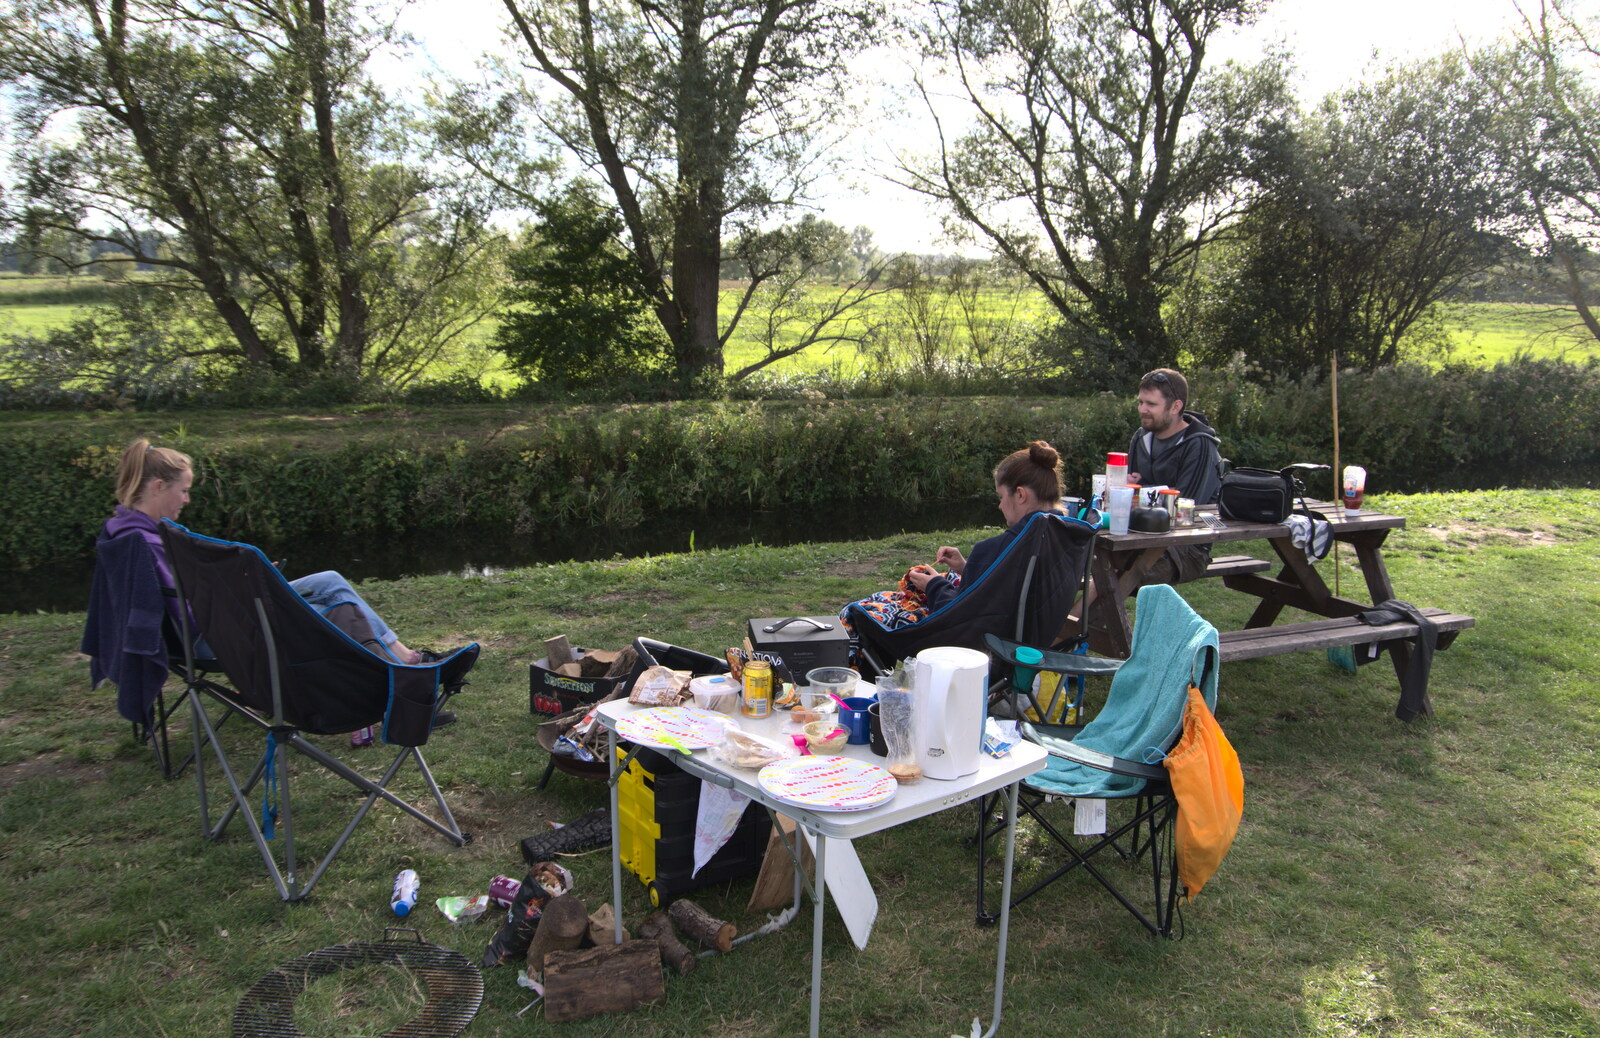 Camping at Three Rivers, Geldeston, Norfolk - 5th September 2020: More campsite action